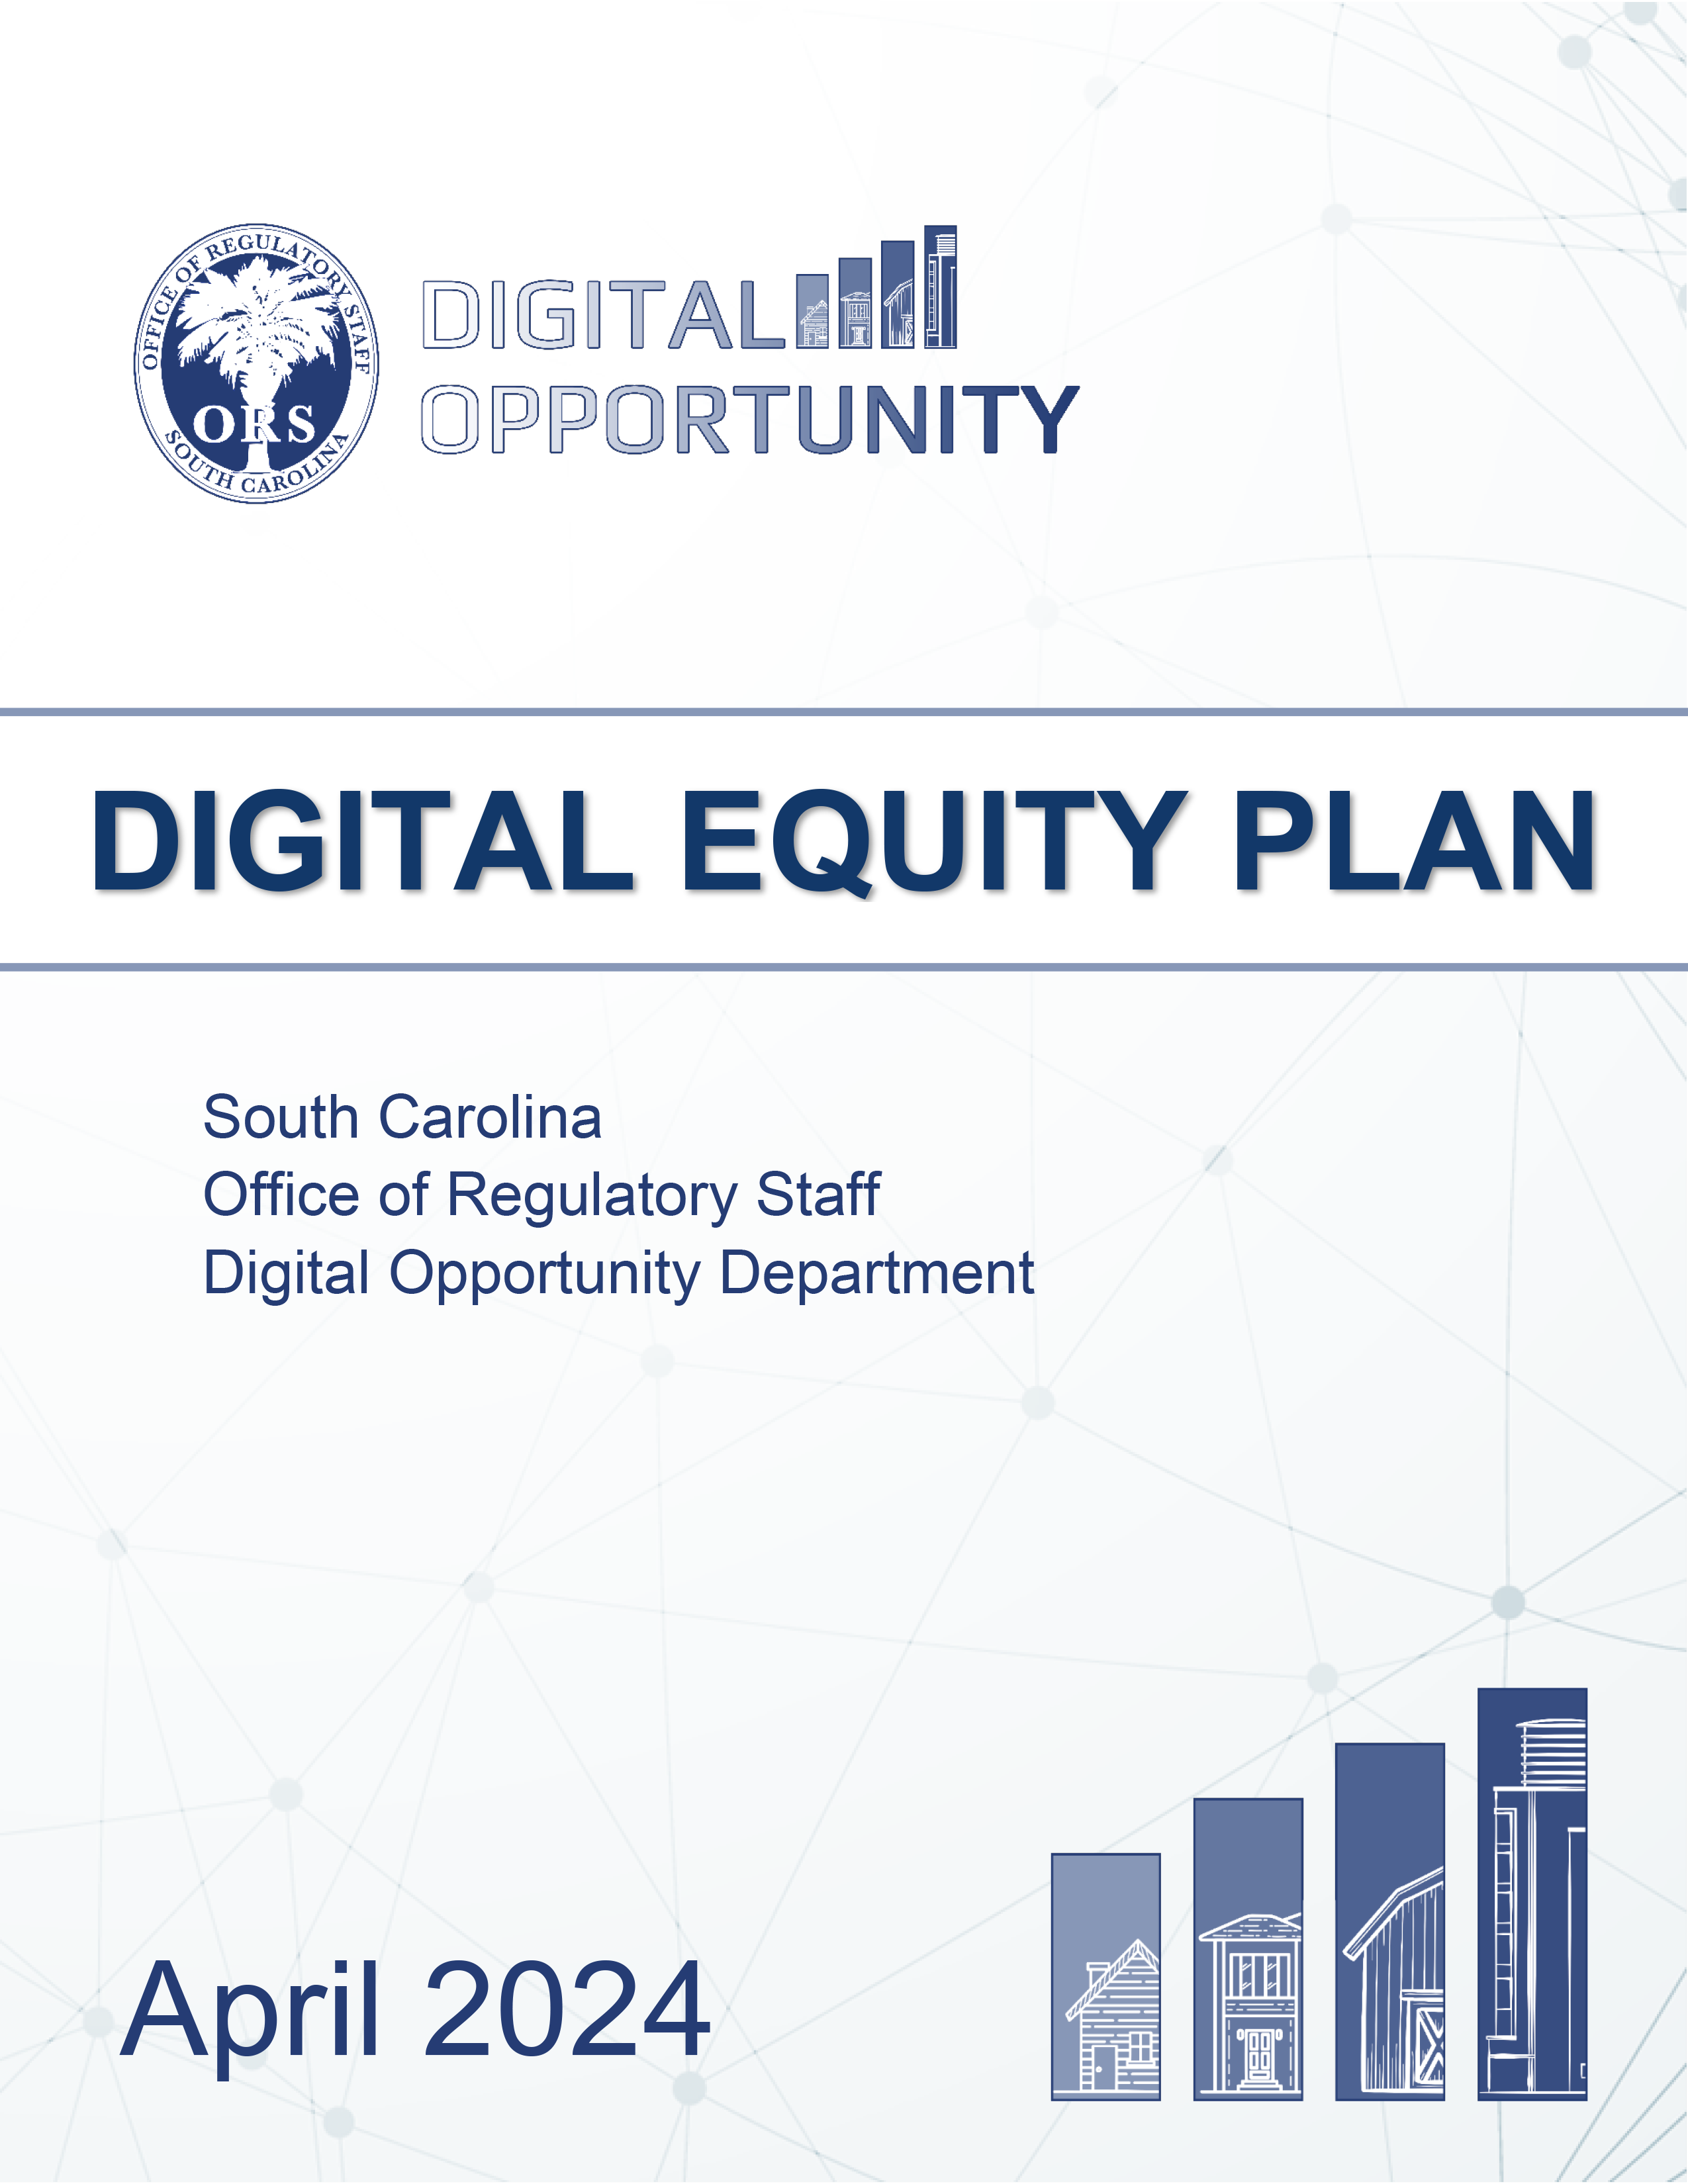 Picture of Digital Equity (DE) Plan with a Link to the Digital Equity (DE) Plan as approved by NTIA on April 2, 2024 in Adobe Acrobat